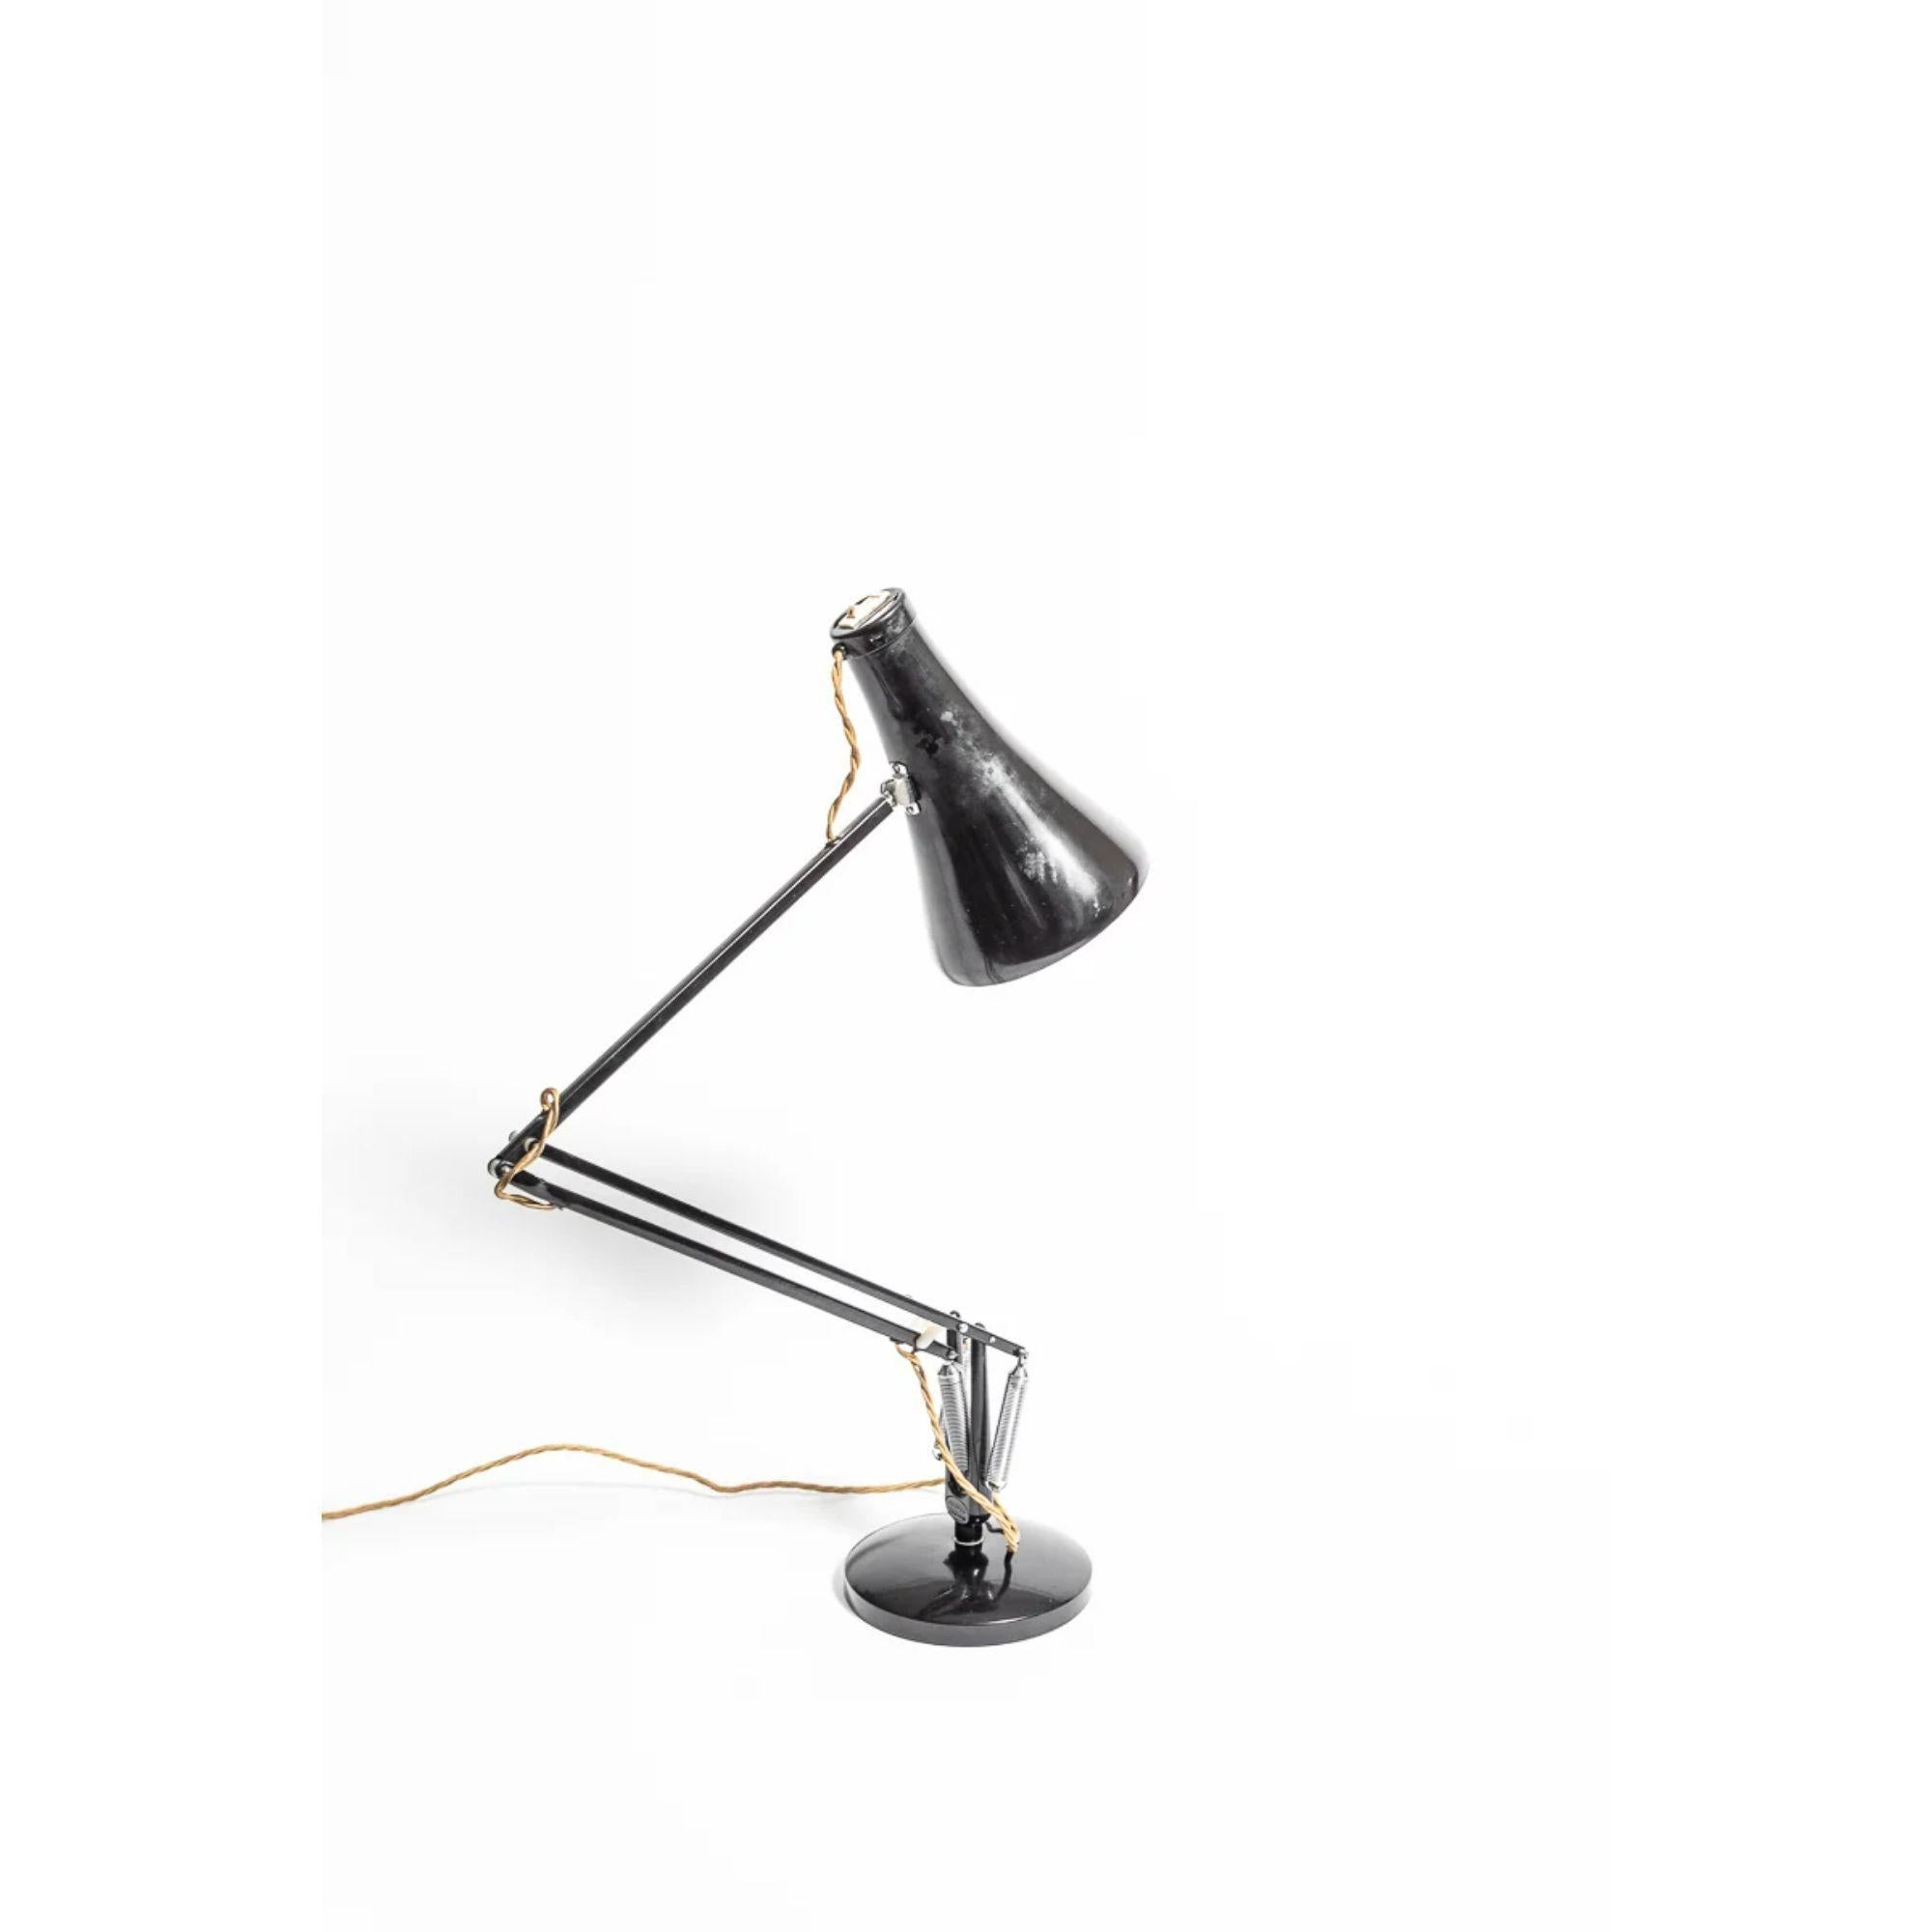 Steel Herbert Terry and Sons Model 75 Anglepoise Desk Lamp, circa 1970